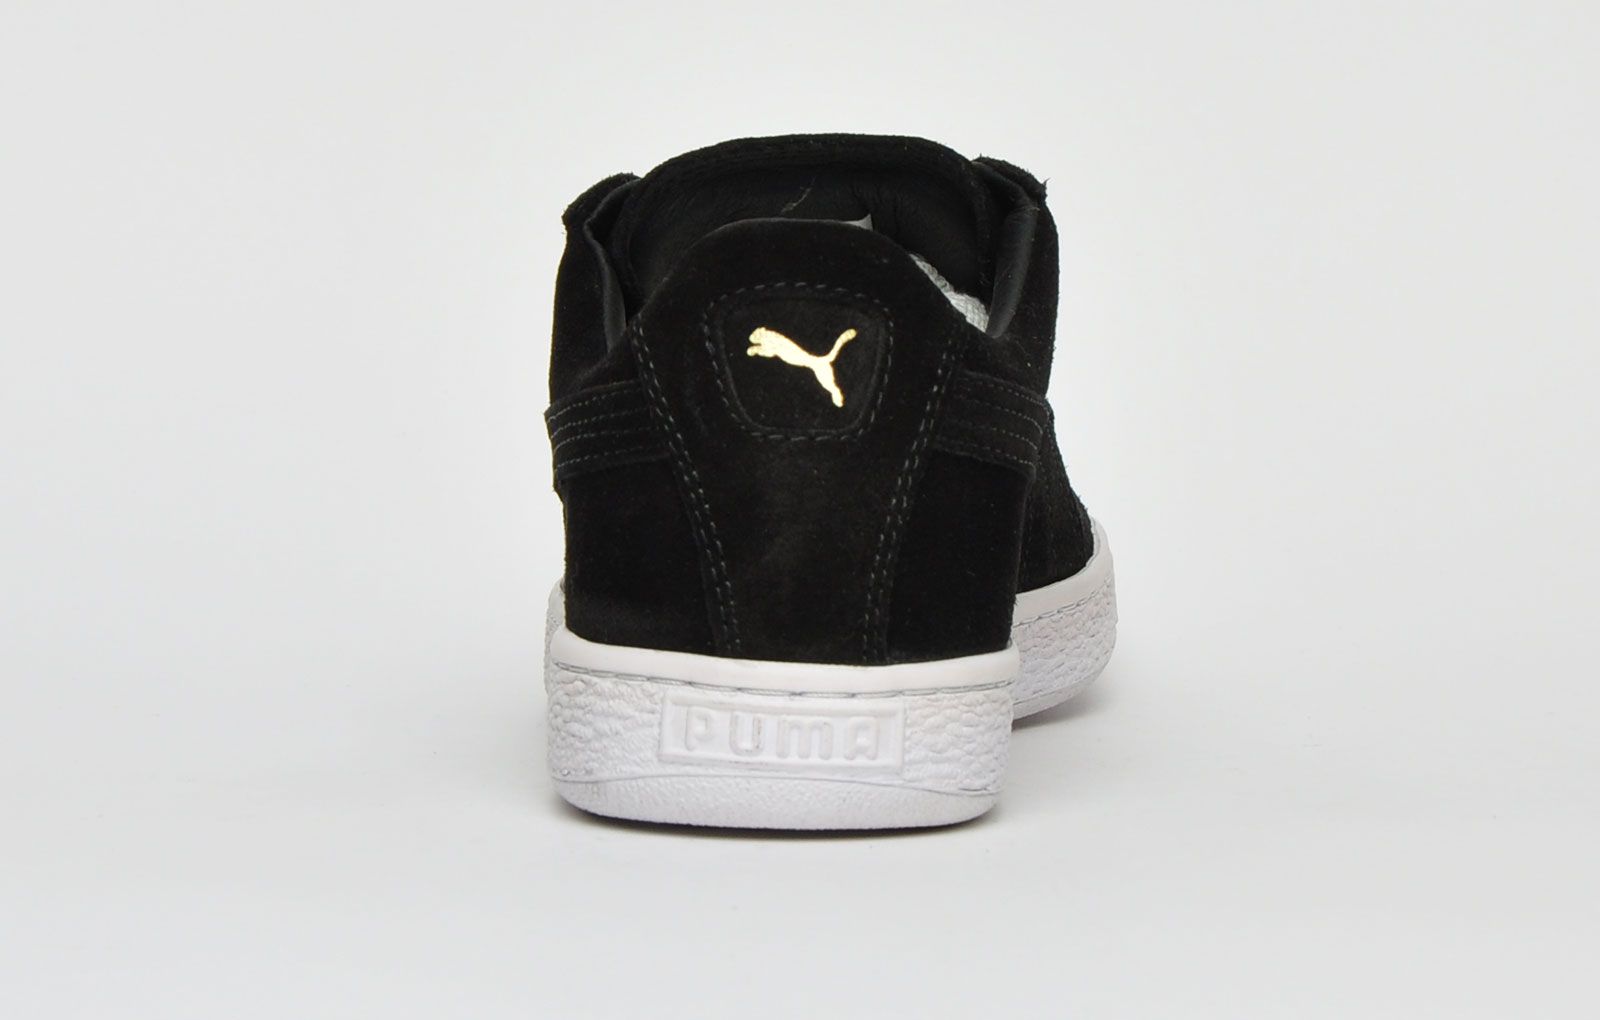 <p>This Puma Classic Suede MB is a truly stunning trainer, manufactured to Pumas highest specifications for that retro feel and look and in a plush finish throughout updated with a metal badge to the tongue and a contrasting gold-foil Puma Suede Logo on the lateral side.</p> <p>These suede’s have a padded heel and ankle collar for a comfortable fit and feature a contrasting textured vintage styled midsole well suited to the rigors of an active lifestyle. </p> <p>- Premium Suede leather upper </p> <p>- Secure lace up system </p> <p>- Additional cushioning and added ankle support </p> <p>- Durable vintage styled outsole with treaded design for added grip </p> <p>- Puma branding throughout</p>